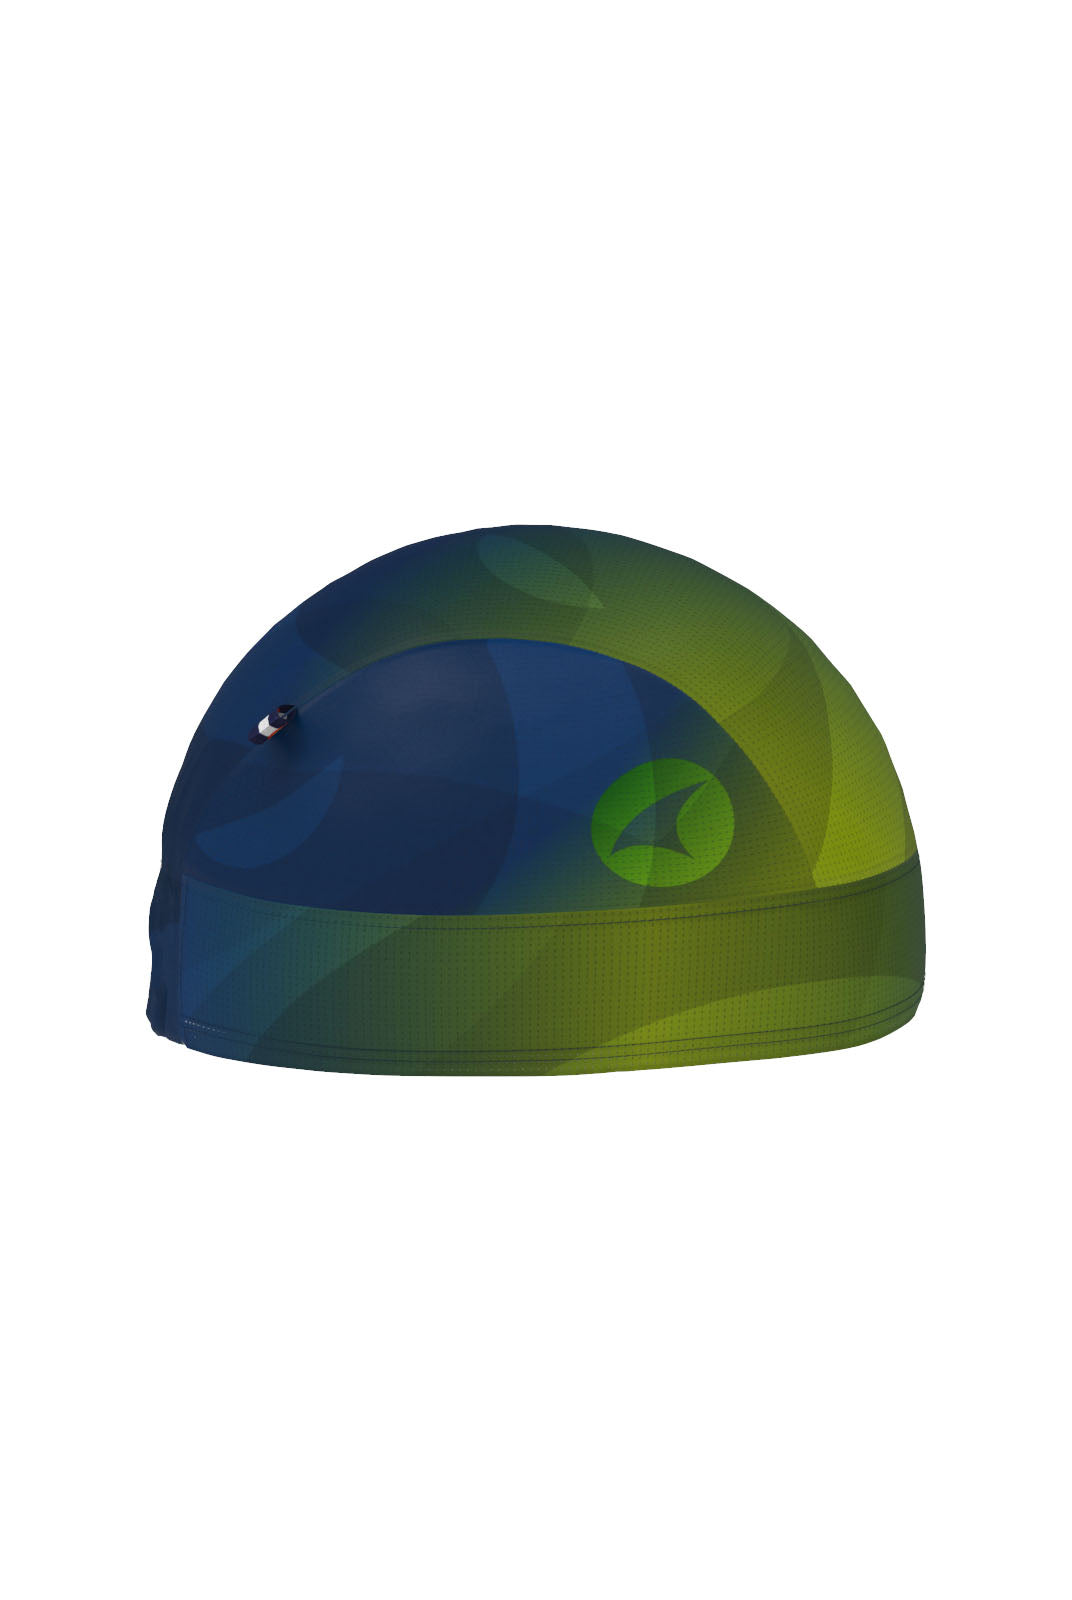 PAC Summer Skull Cap - Cool Fade Right View